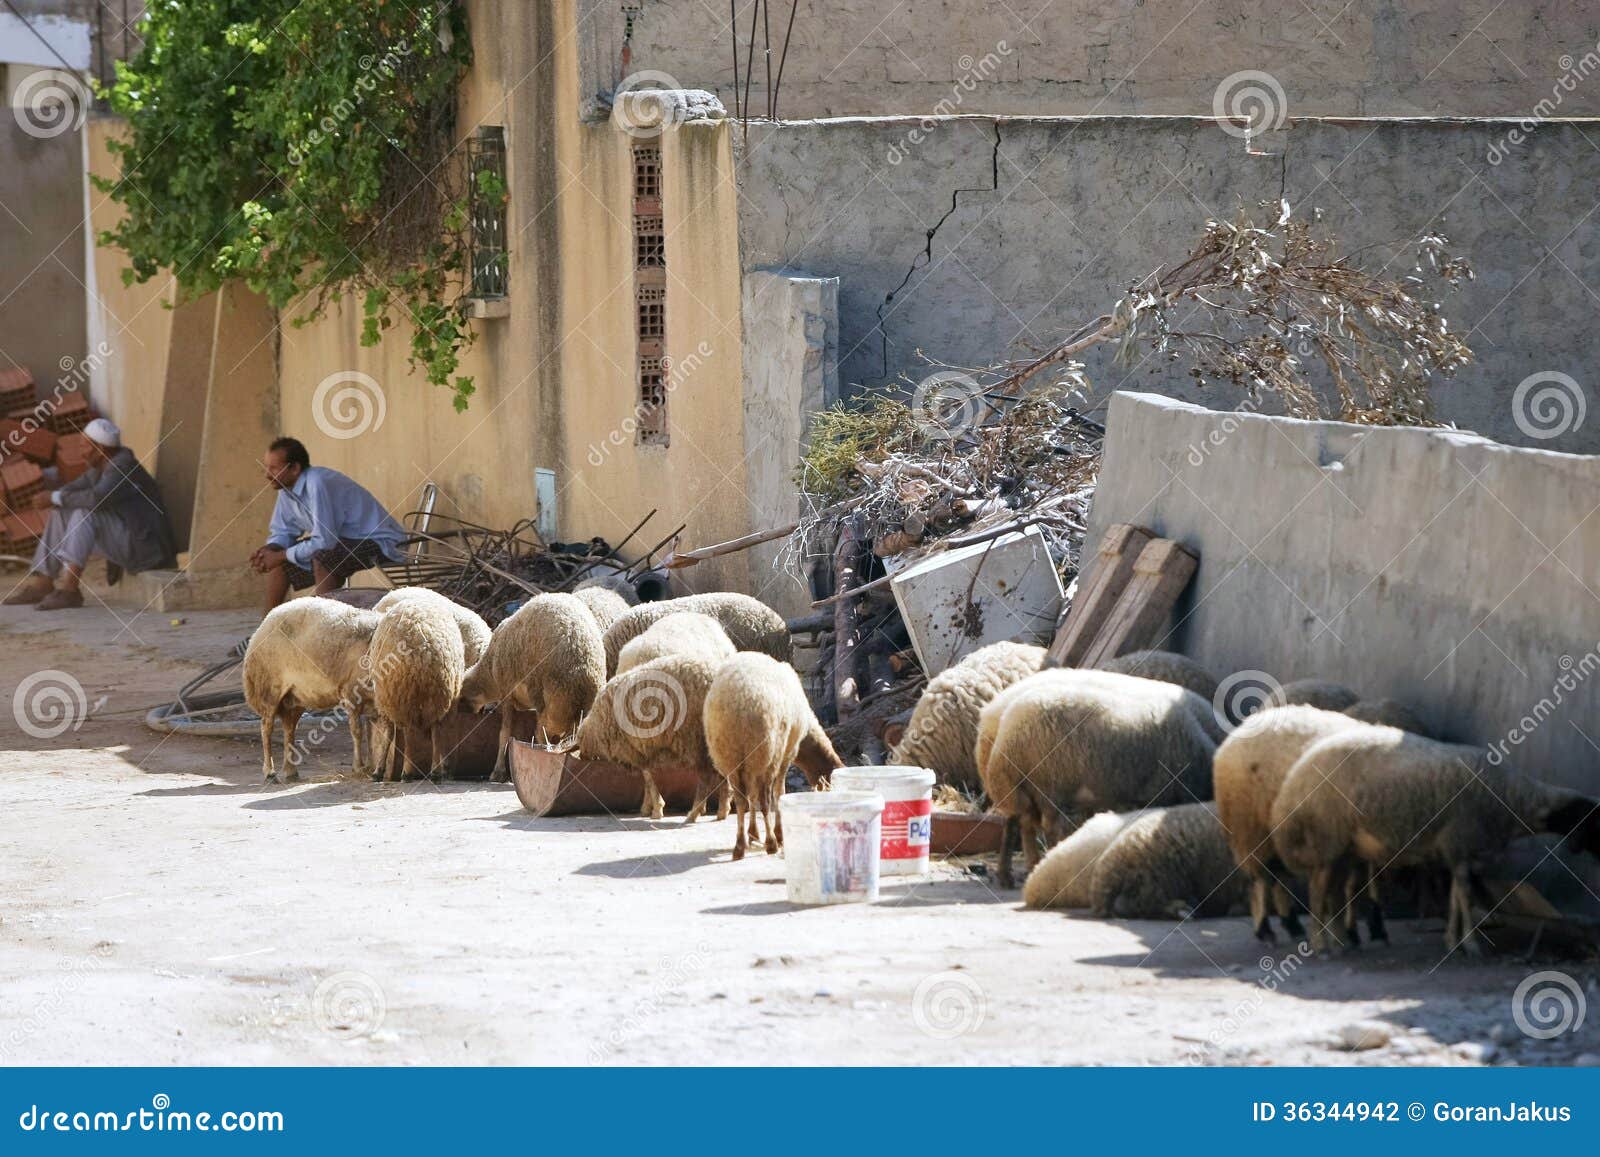 Sheeps on the street of Kairouan. Kairouan, Tunisia - September 16th, 2012 : In the suburbs, some of the local people are raising sheep in Kairouan, Tunisia. The Tunis (also known as Tunisian Barbary) is a medium sized, fat tailed sheep, that is naturally hornless with cream colored wool and a cinnamon red face and legs. This breed is raised primarily for meat.